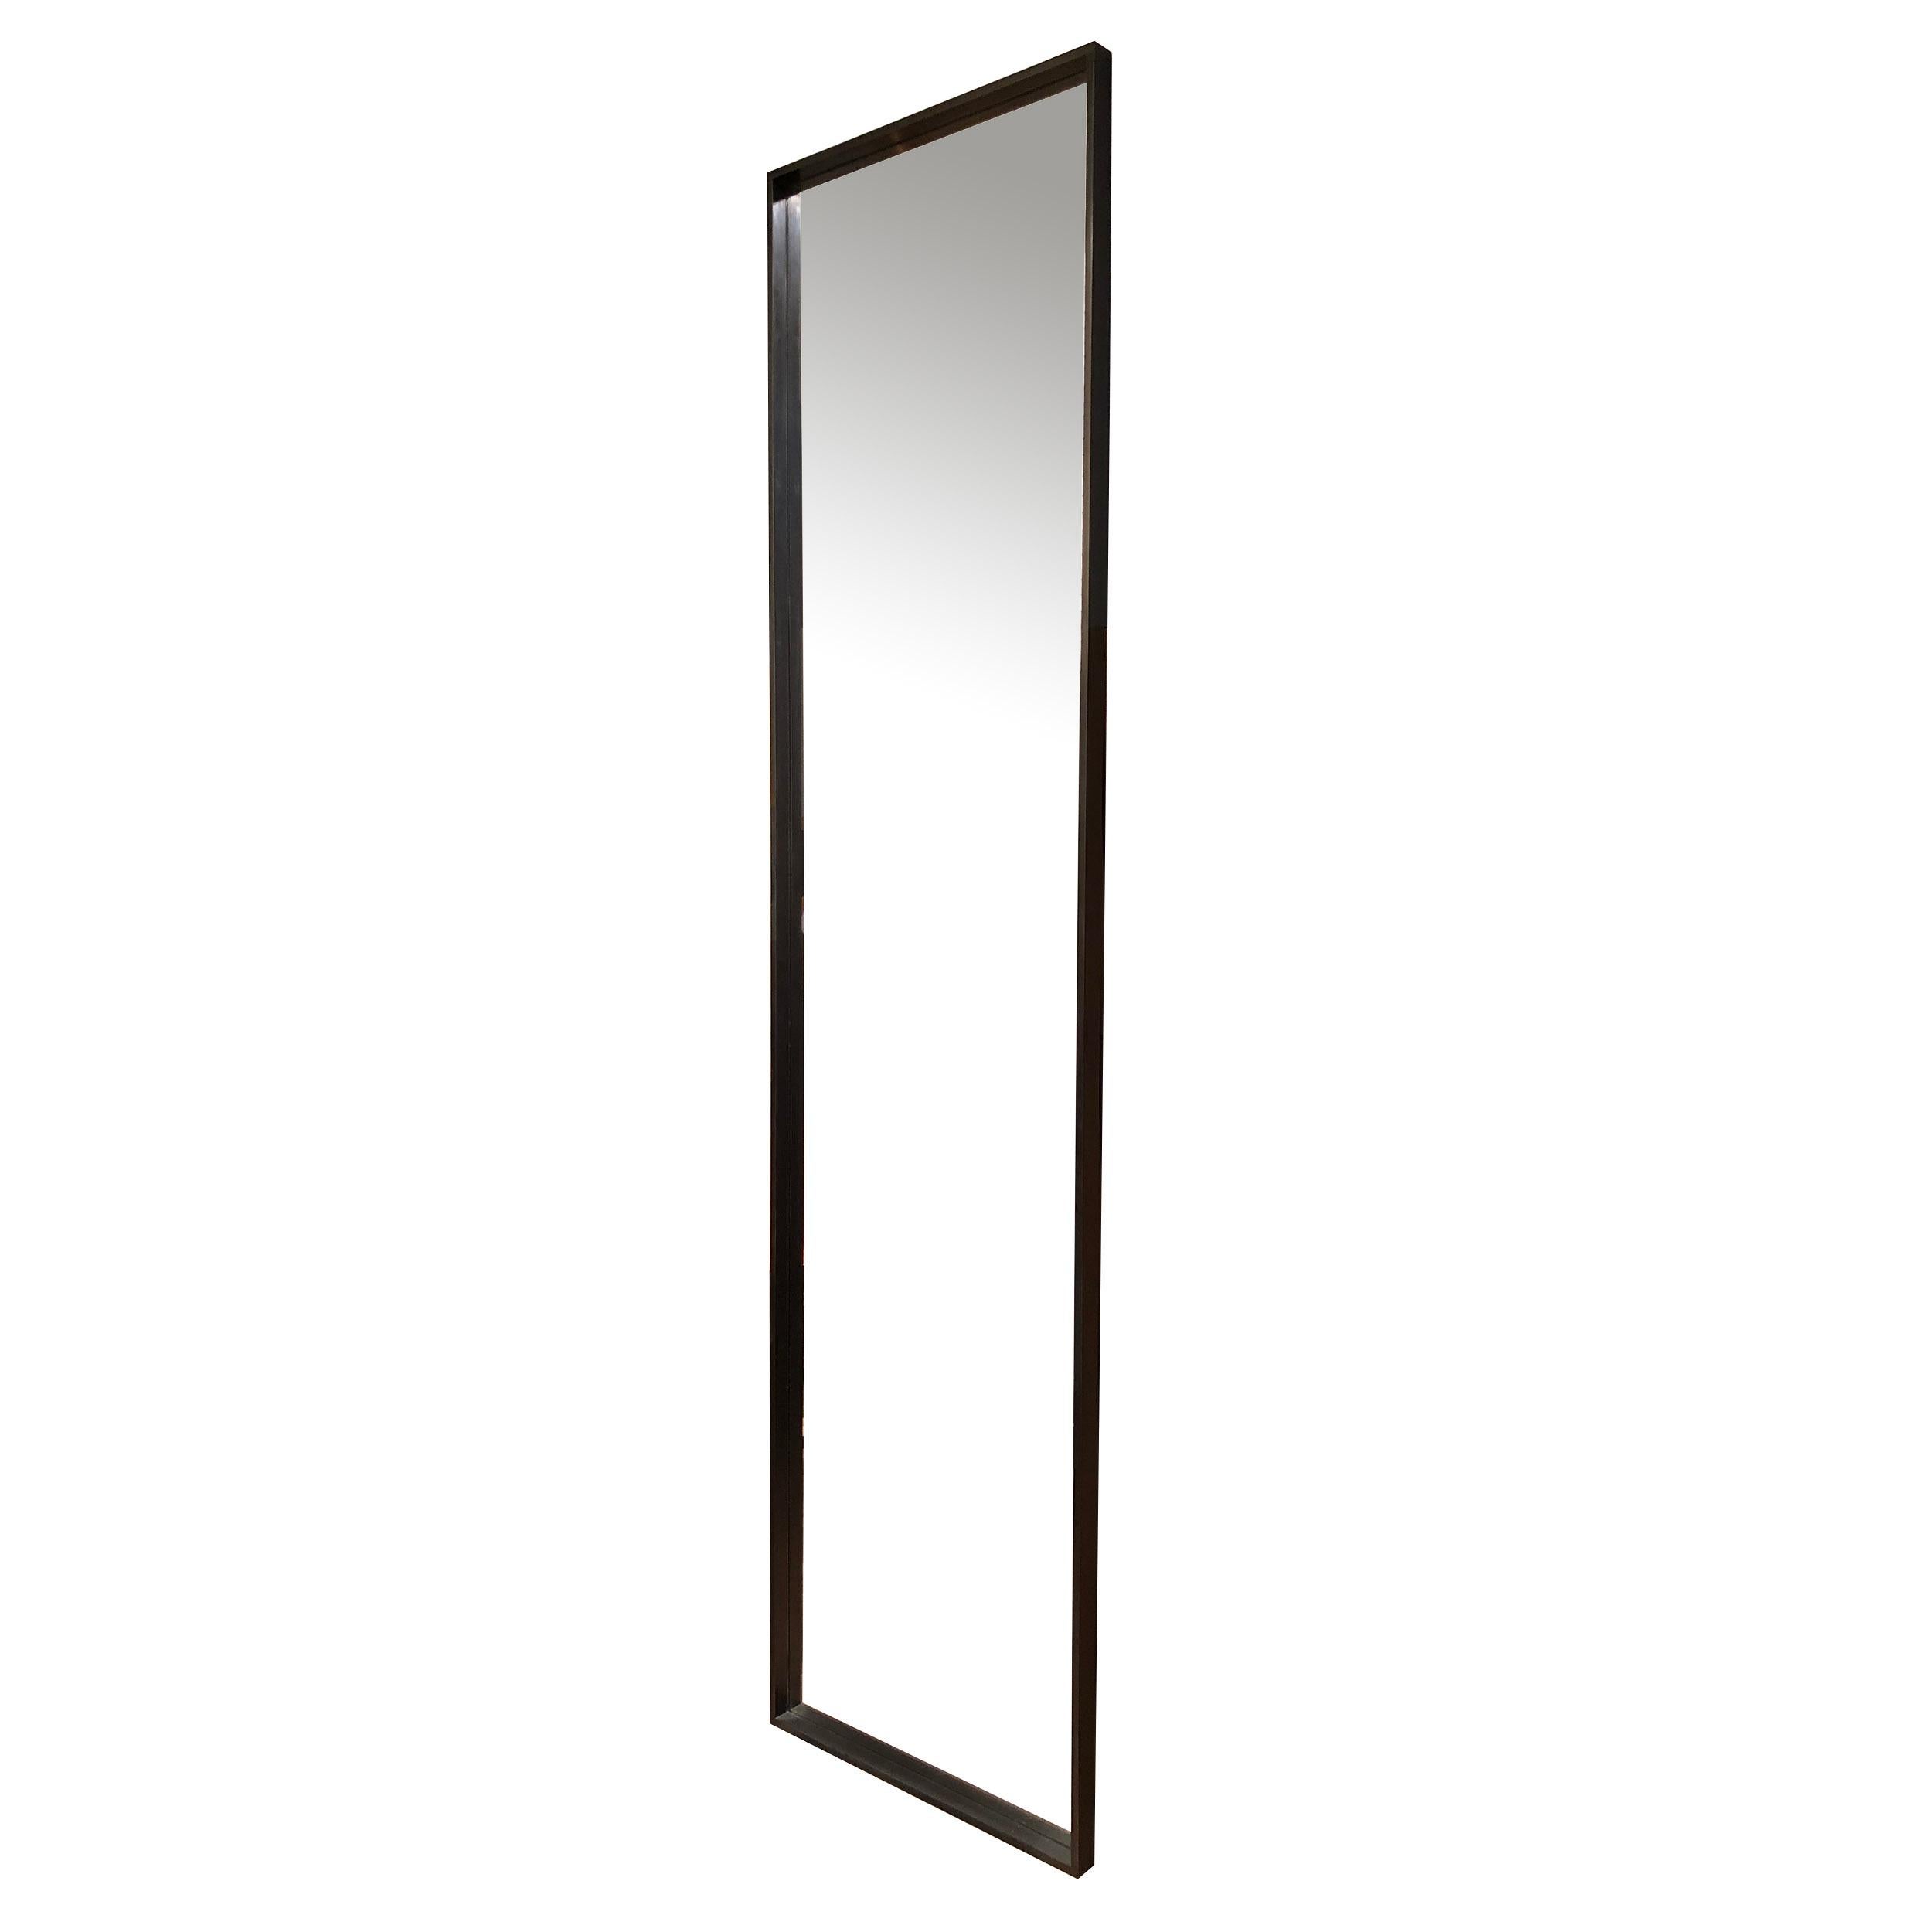 A WYETH original rectangular mirror with a machined deep-edge blackened bronze frame. Measures: 24 x 96 inches. Crafted by the Wyeth Workshop in NY. Available in polished, brushed, patinated or blackened bronze.

Also available in custom sizes.
    